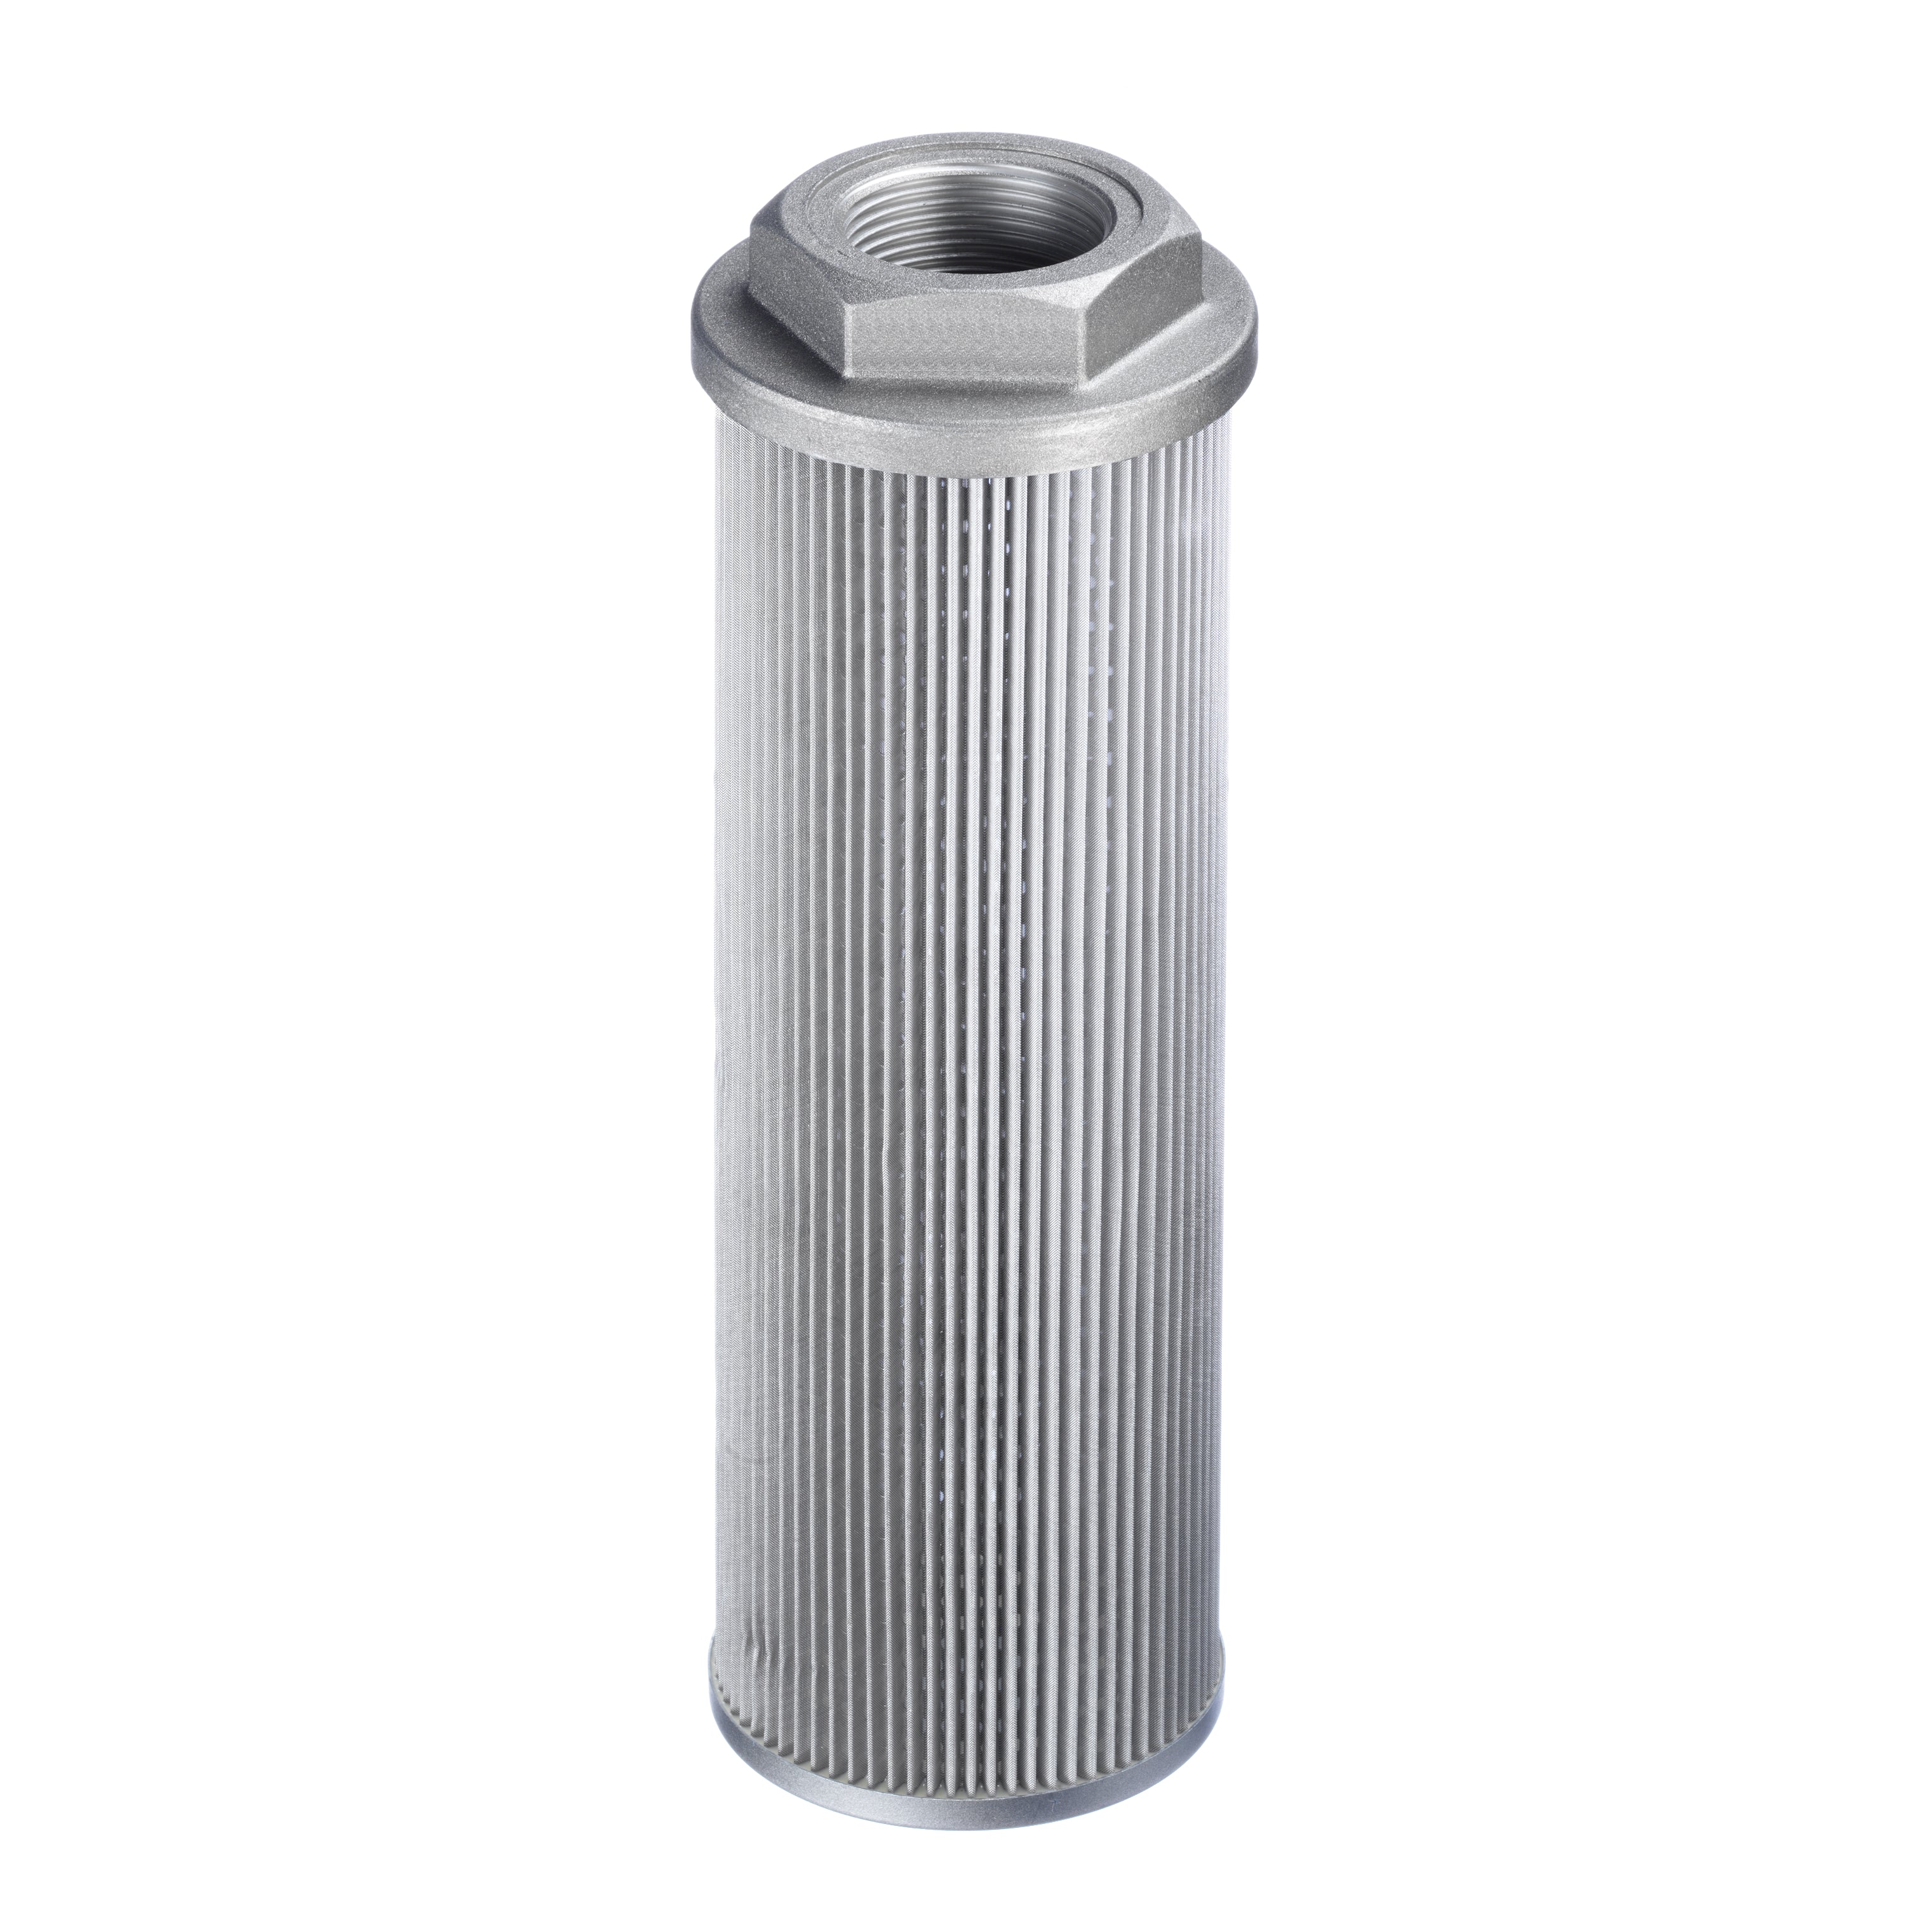 SUS-050-N08-105-125-A-O : Stauff Suction Strainer, Aluminum End Cap, 1/2" NPT, 3.9GPM, 125 Micron, No Bypass